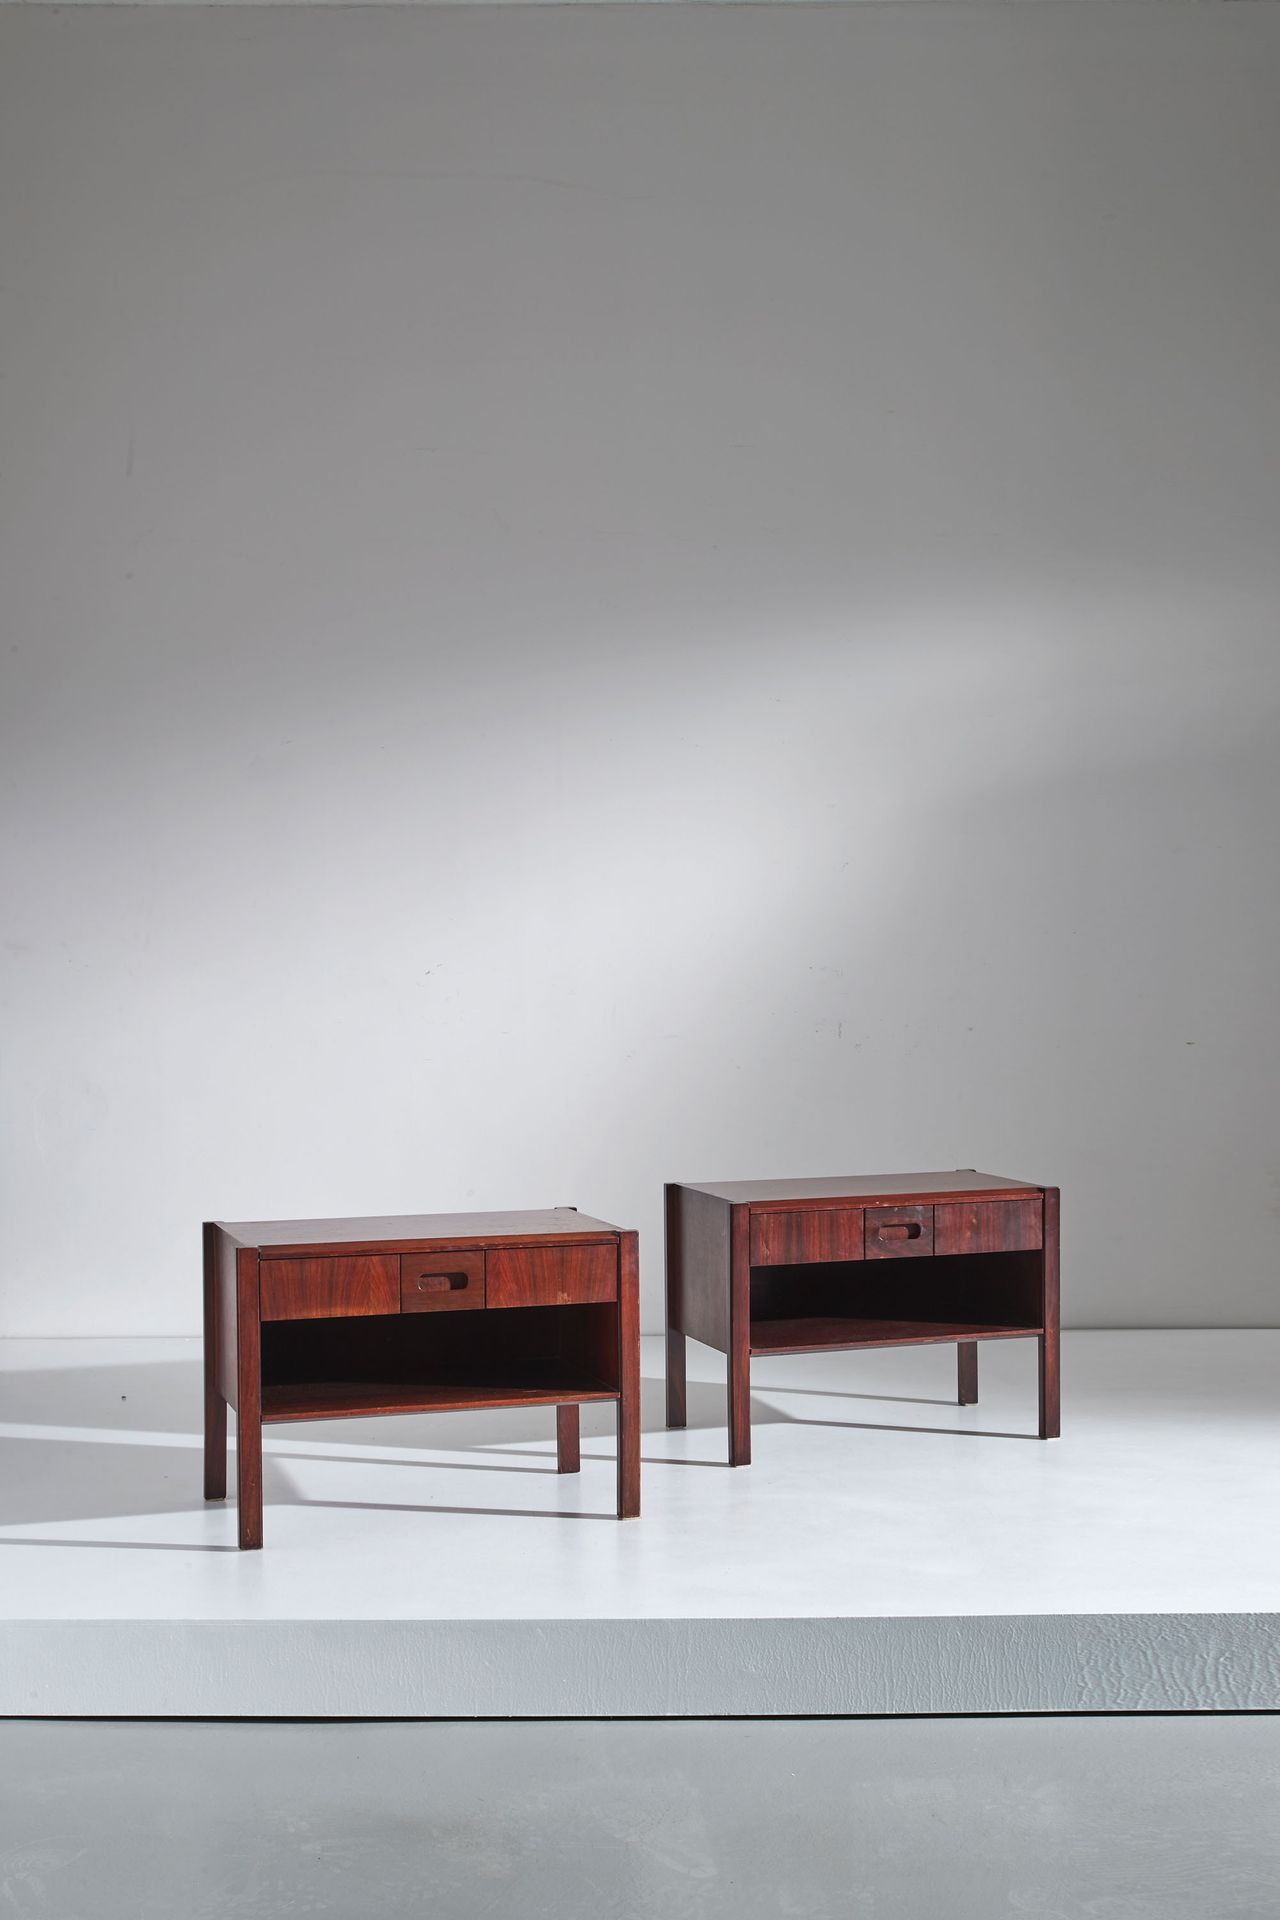 SORMANI Pair of nightstands. Exotic wood. Italy ca. 1960s.
Cm 50x69x40
A PAIR OF&hellip;